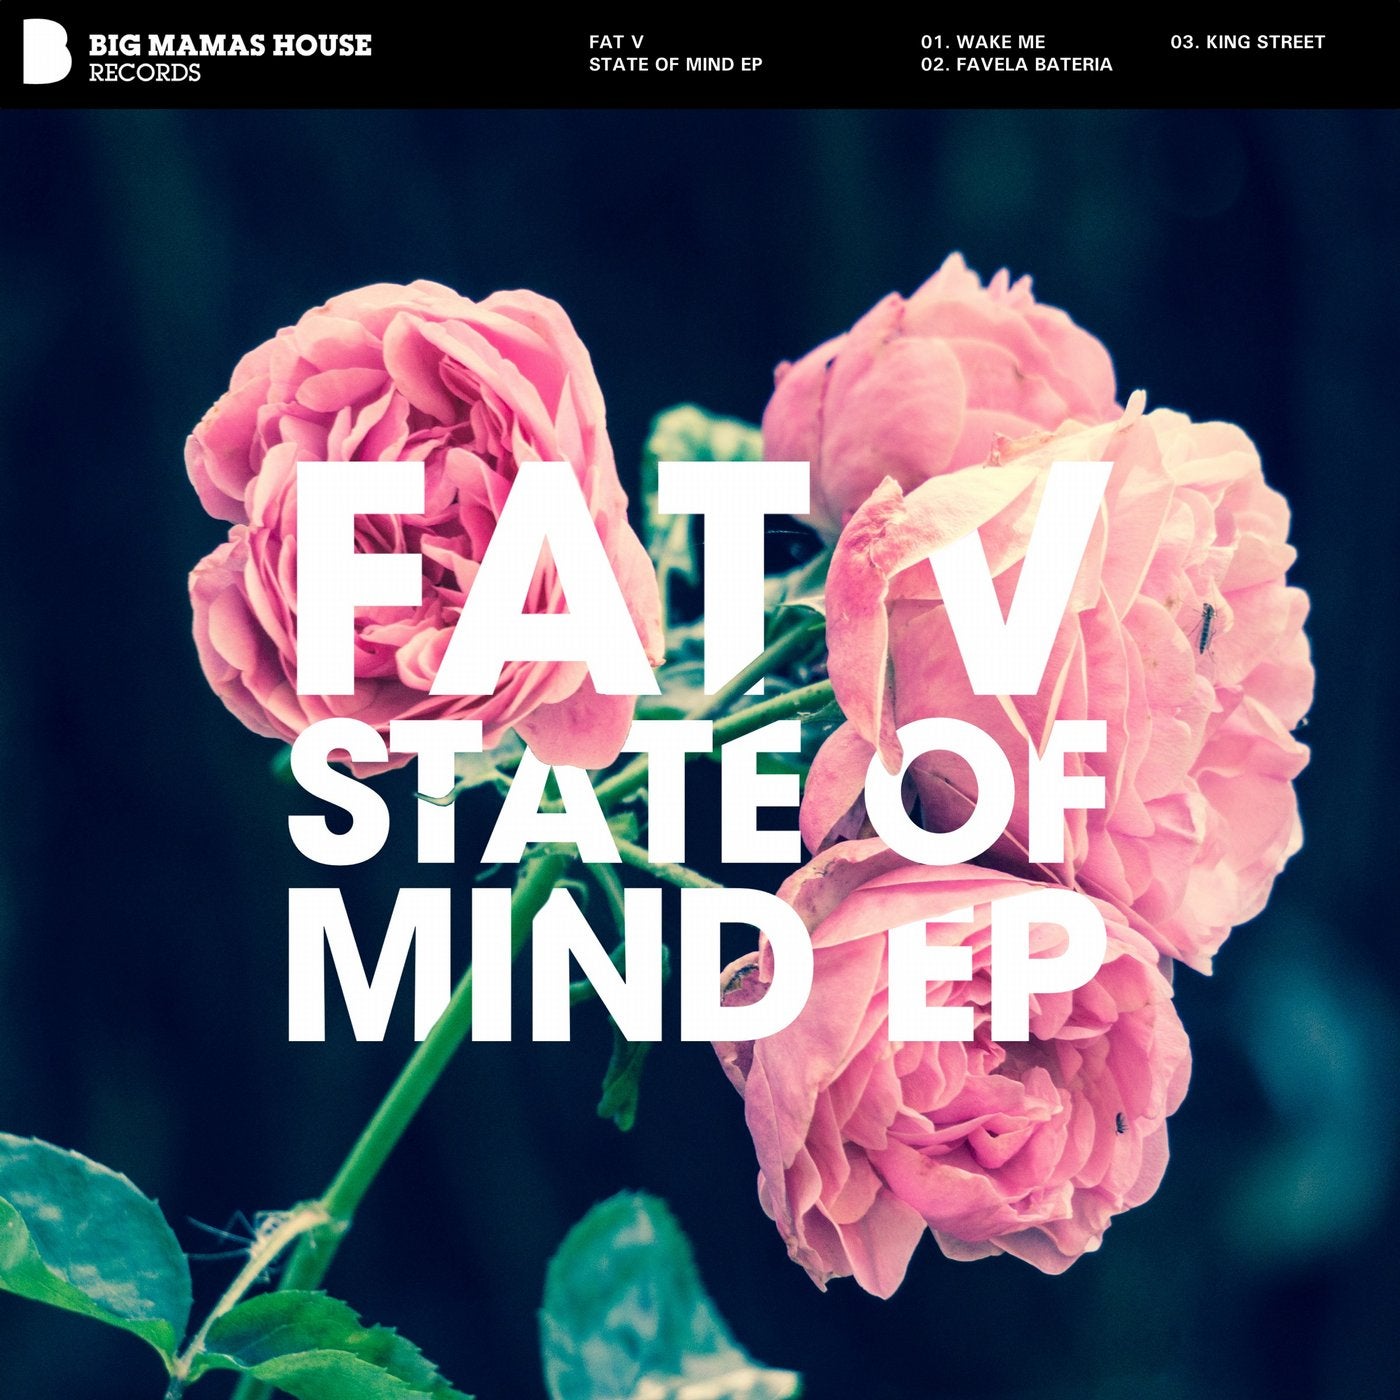 State of Mind EP